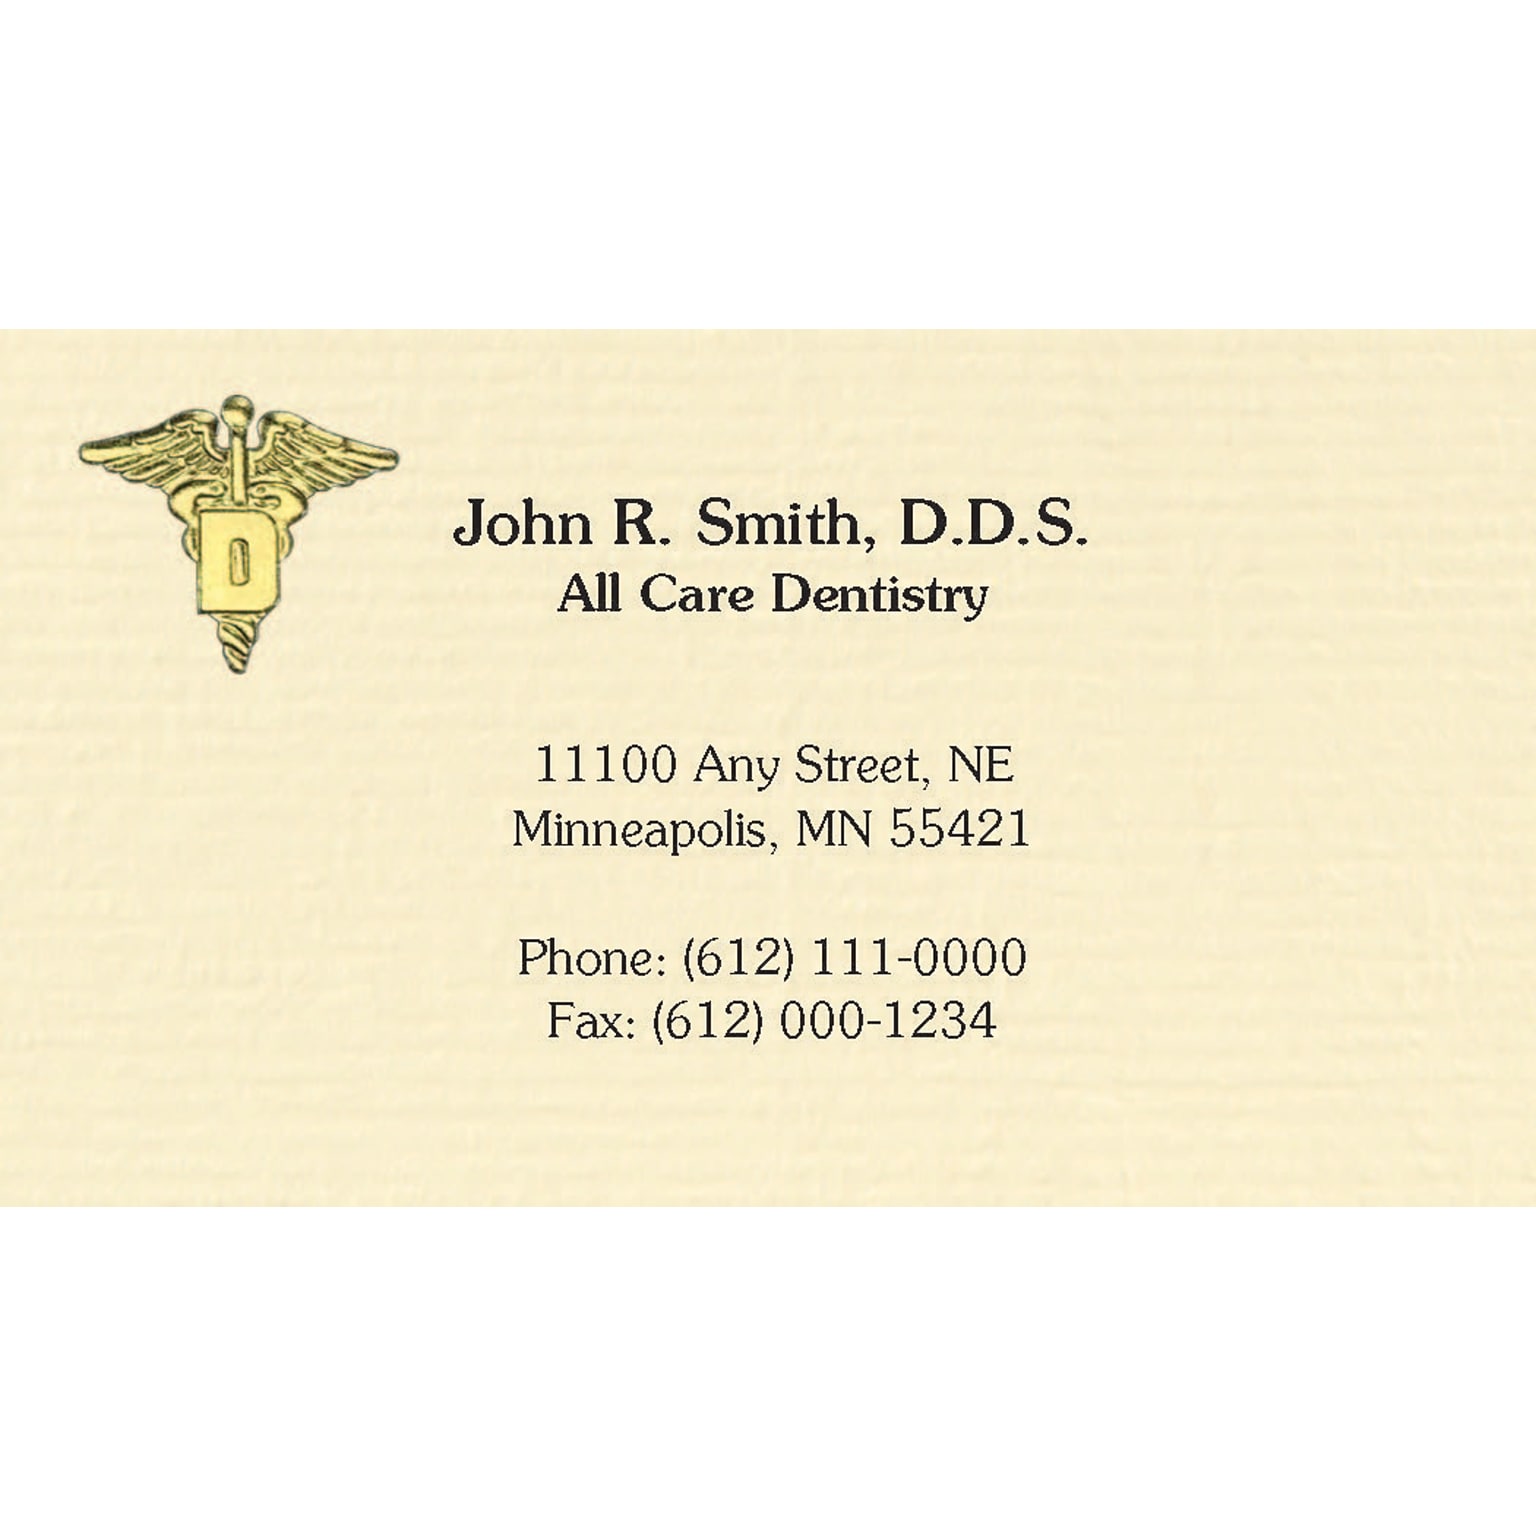 Custom Gold Foil Embossed Business Cards, CLASSIC® Ivory Laid 80#, Flat Ink, 1 Standard Ink, 1-Sided, Logo 202, 250/PK